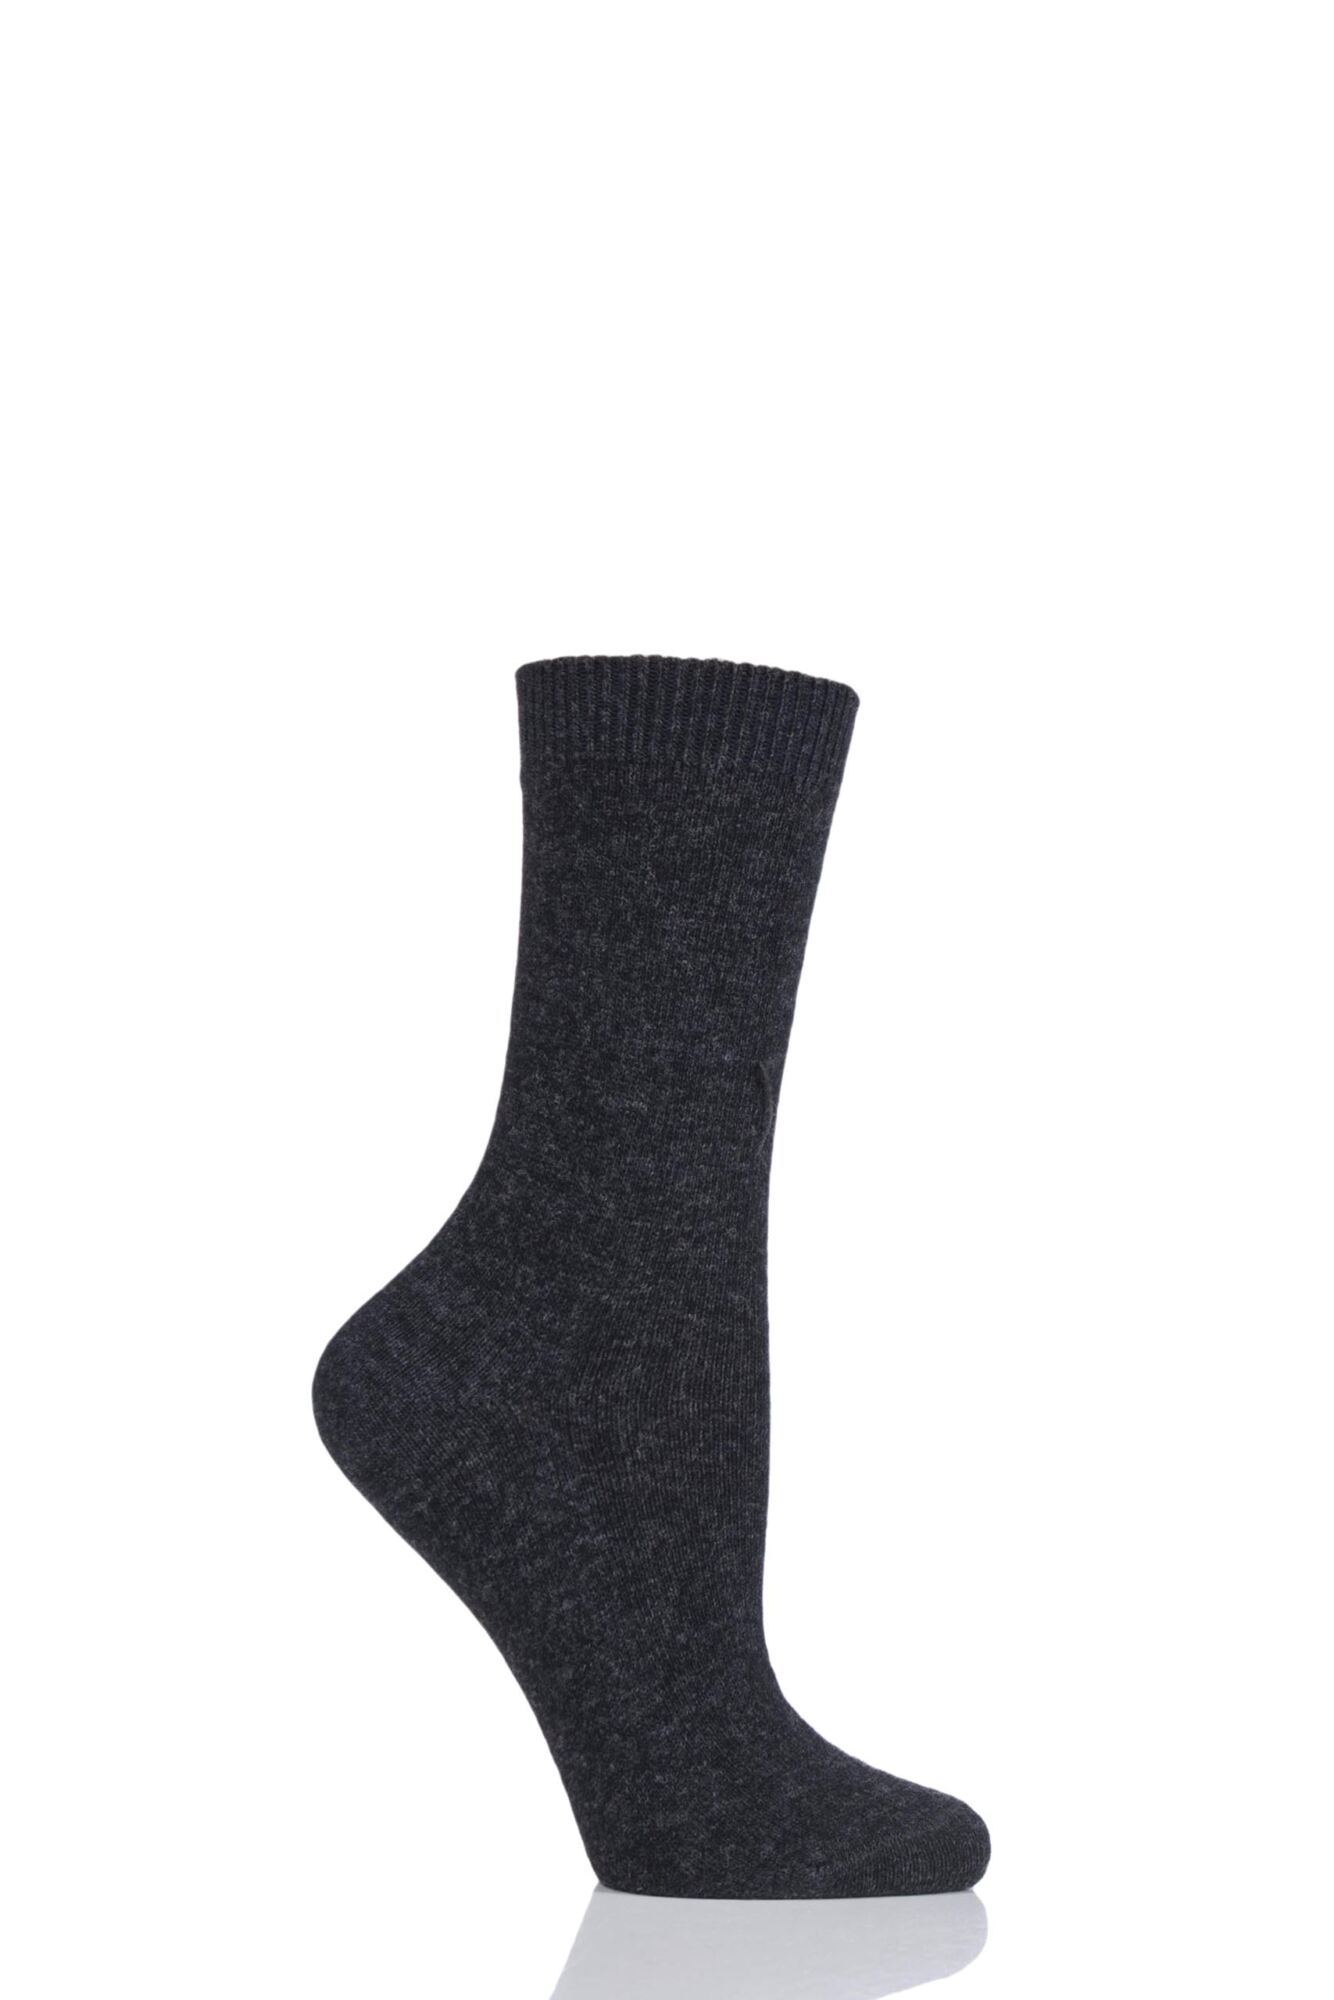 1 Pair Cosy Wool and Cashmere Socks Ladies - Falke